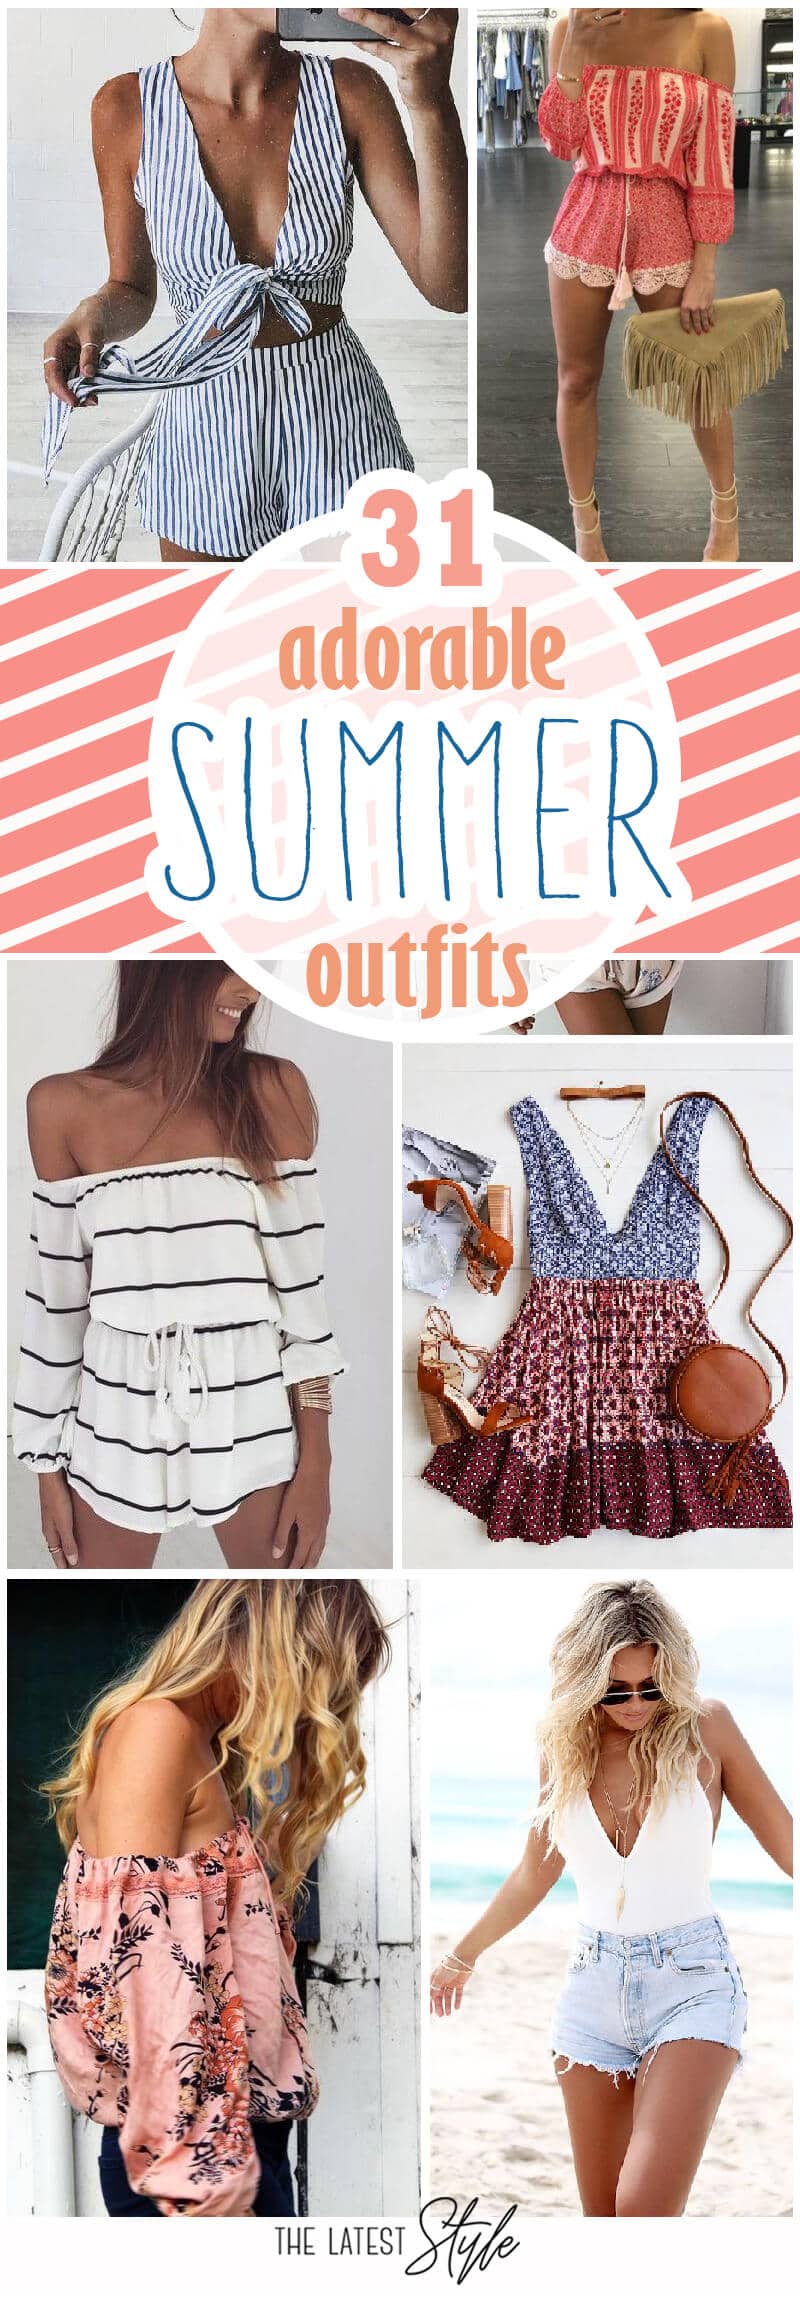 31 Adorable Summer Outfit Inspirations